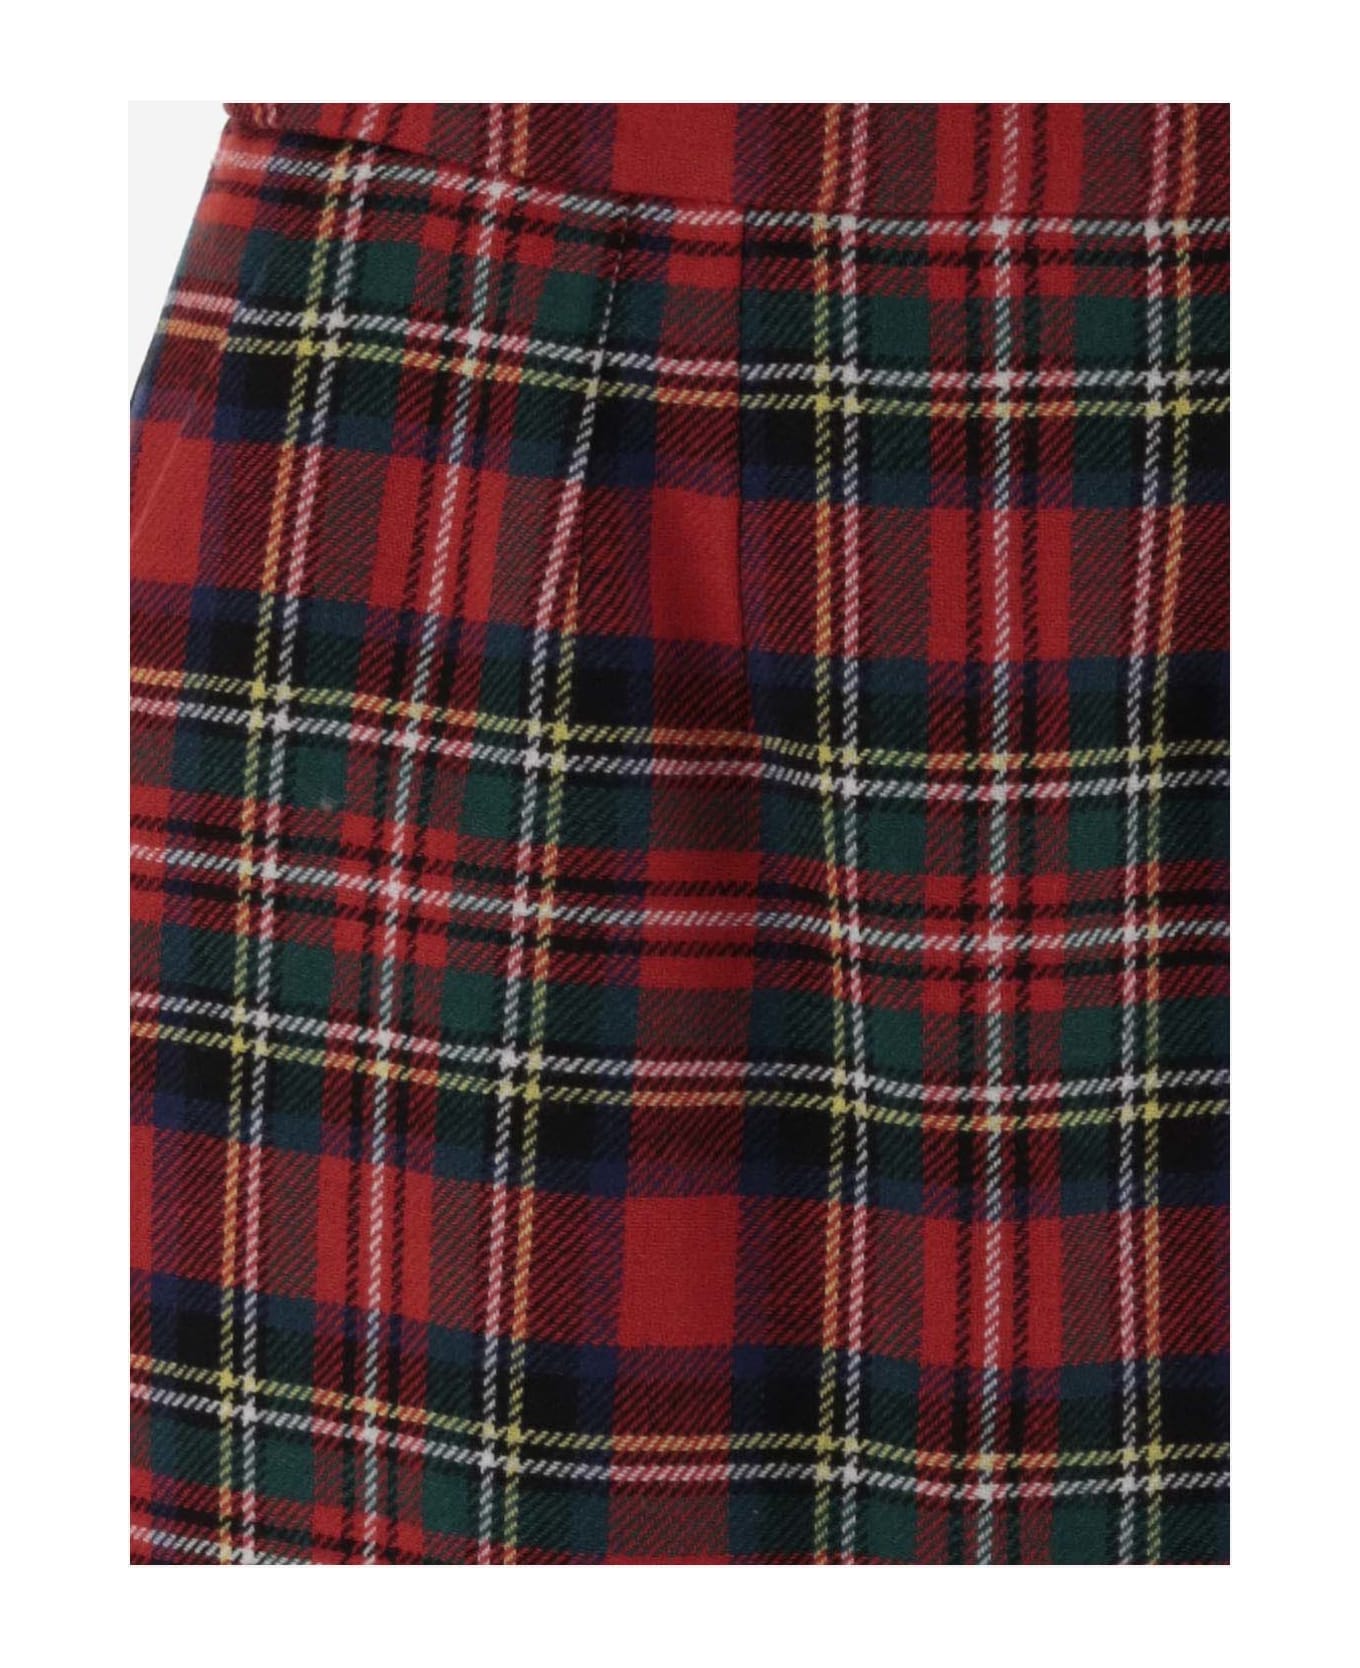 Saint Laurent Wool Blend Skirt With Check Pattern - ROUGE MULTICO